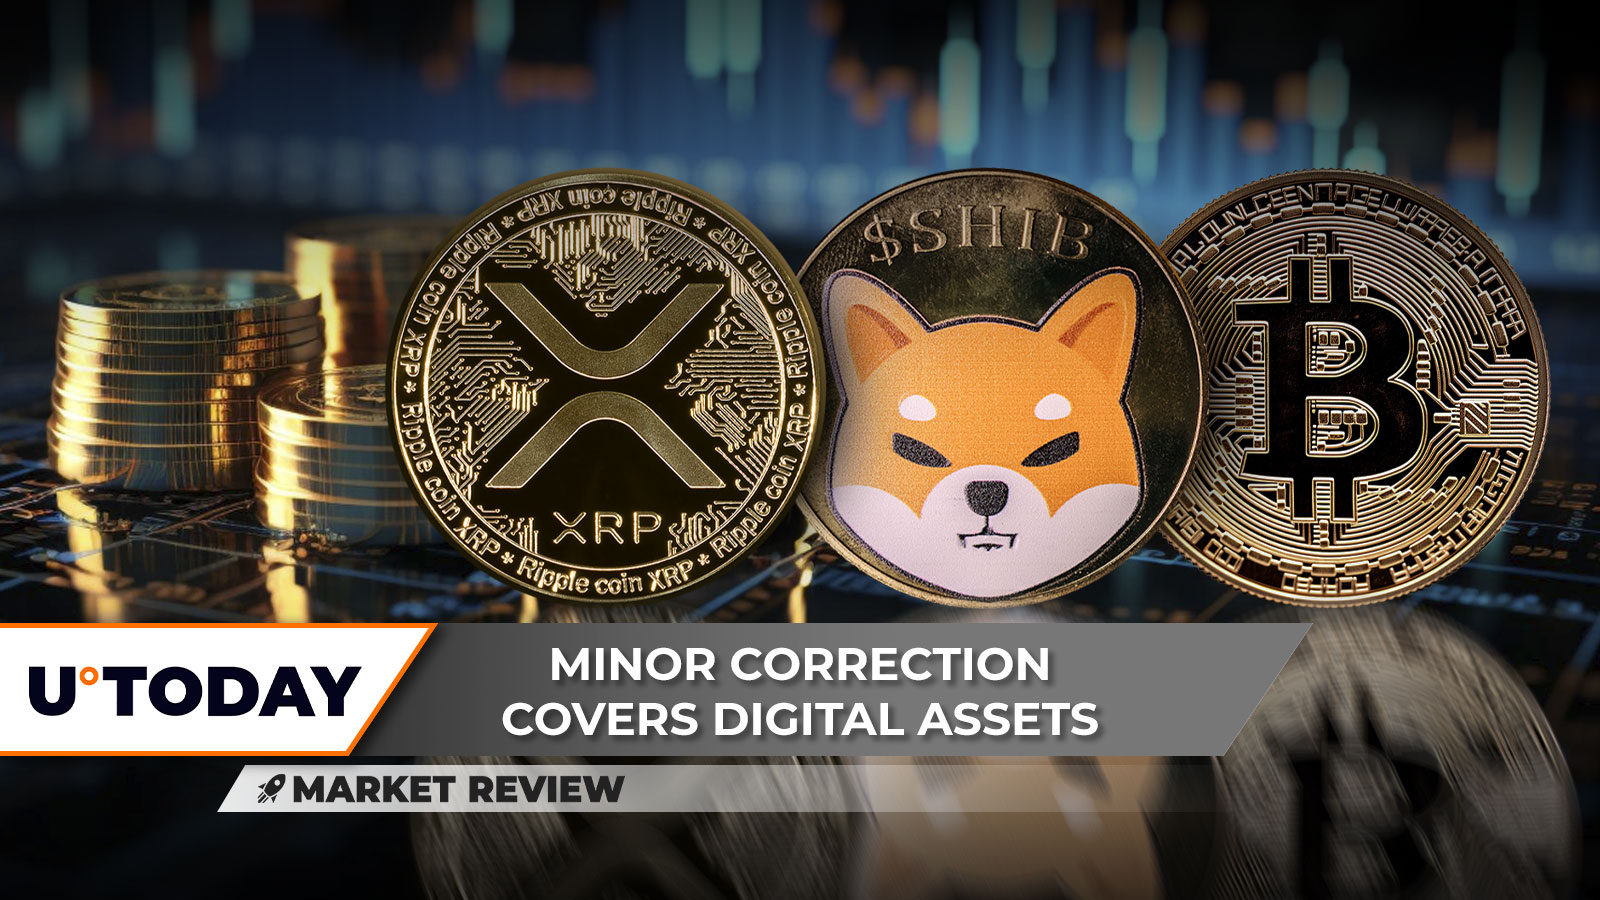 XRP Back to Bottom? Shiba Inu (SHIB) Rally Stops, But There's Still Hope, Did Bitcoin (BTC) Reach New Top?